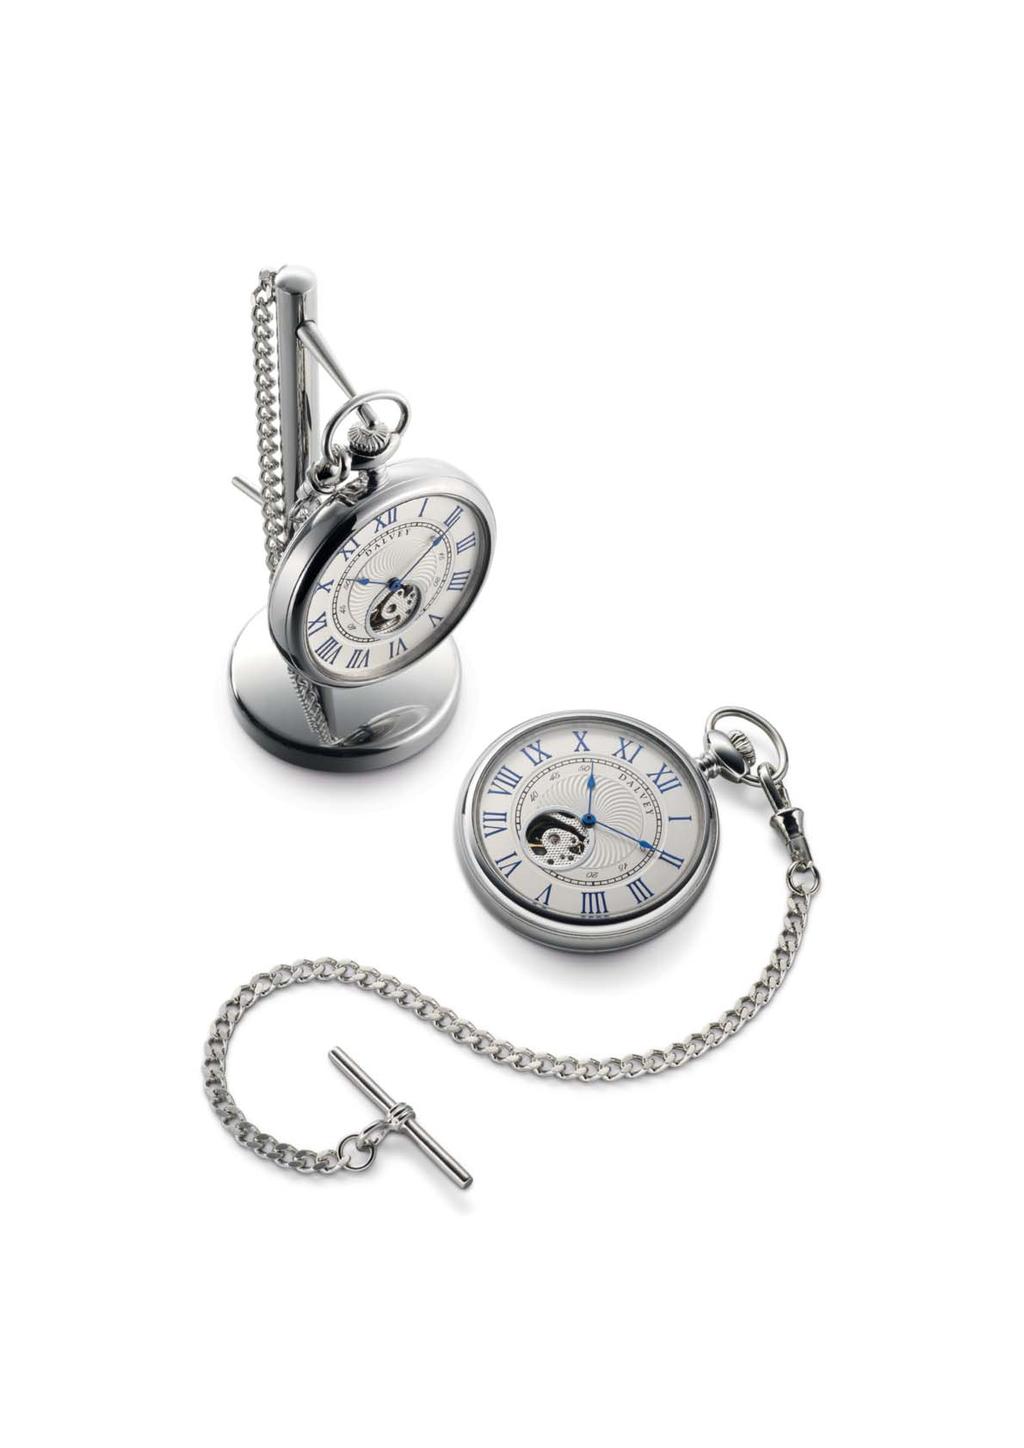 OPEN-FACE POCKET WATCH The Open-Face Pocket Watch offers a striking, richly-textured dial with a view of the exposed mechanical movement that is mirrored by way of a